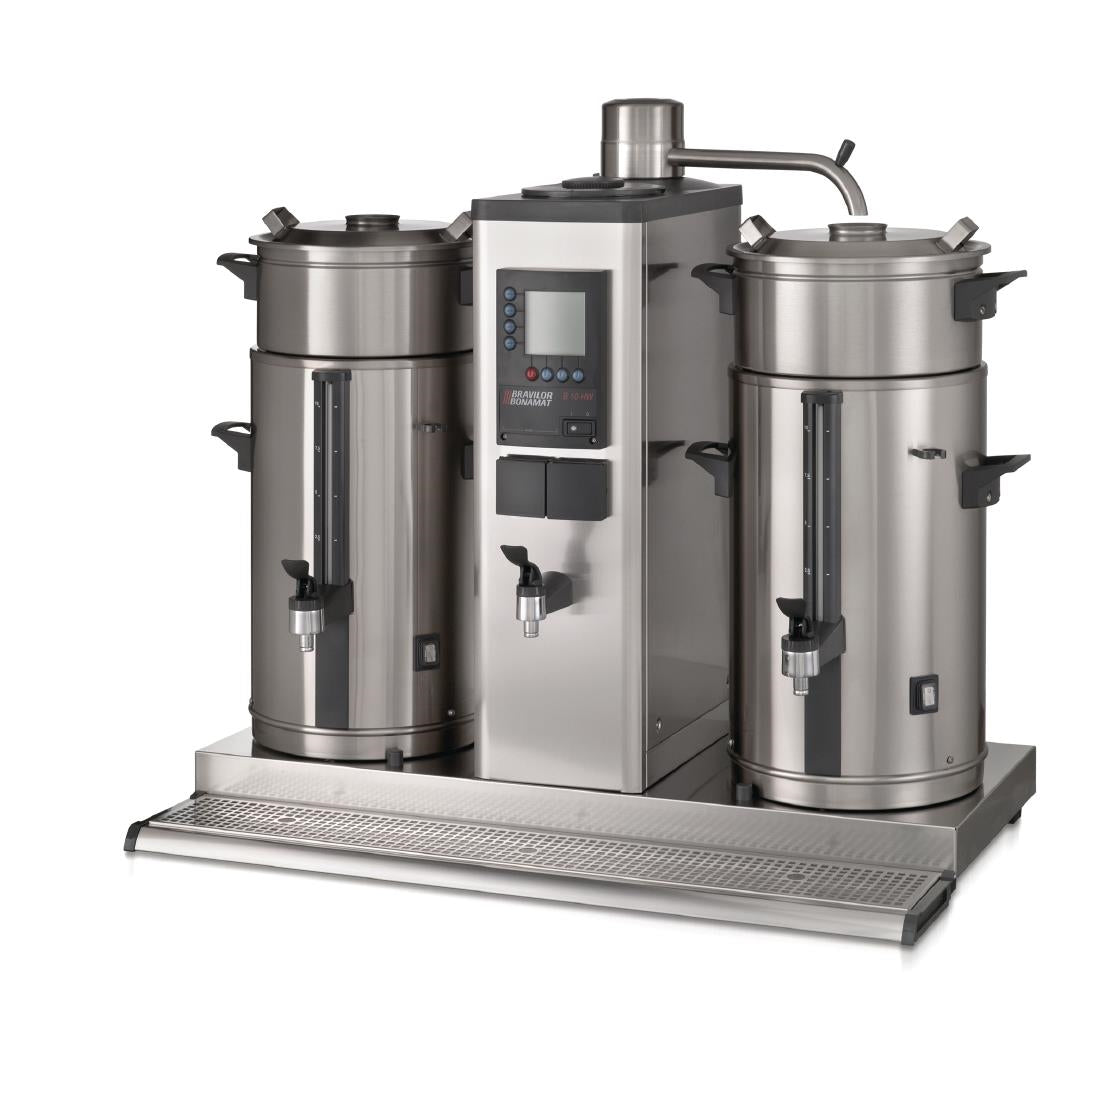 DC690-3P Bravilor B10 HW Bulk Coffee Brewer with 2x10Ltr Coffee Urns and Hot Water Tap 3 Phase JD Catering Equipment Solutions Ltd